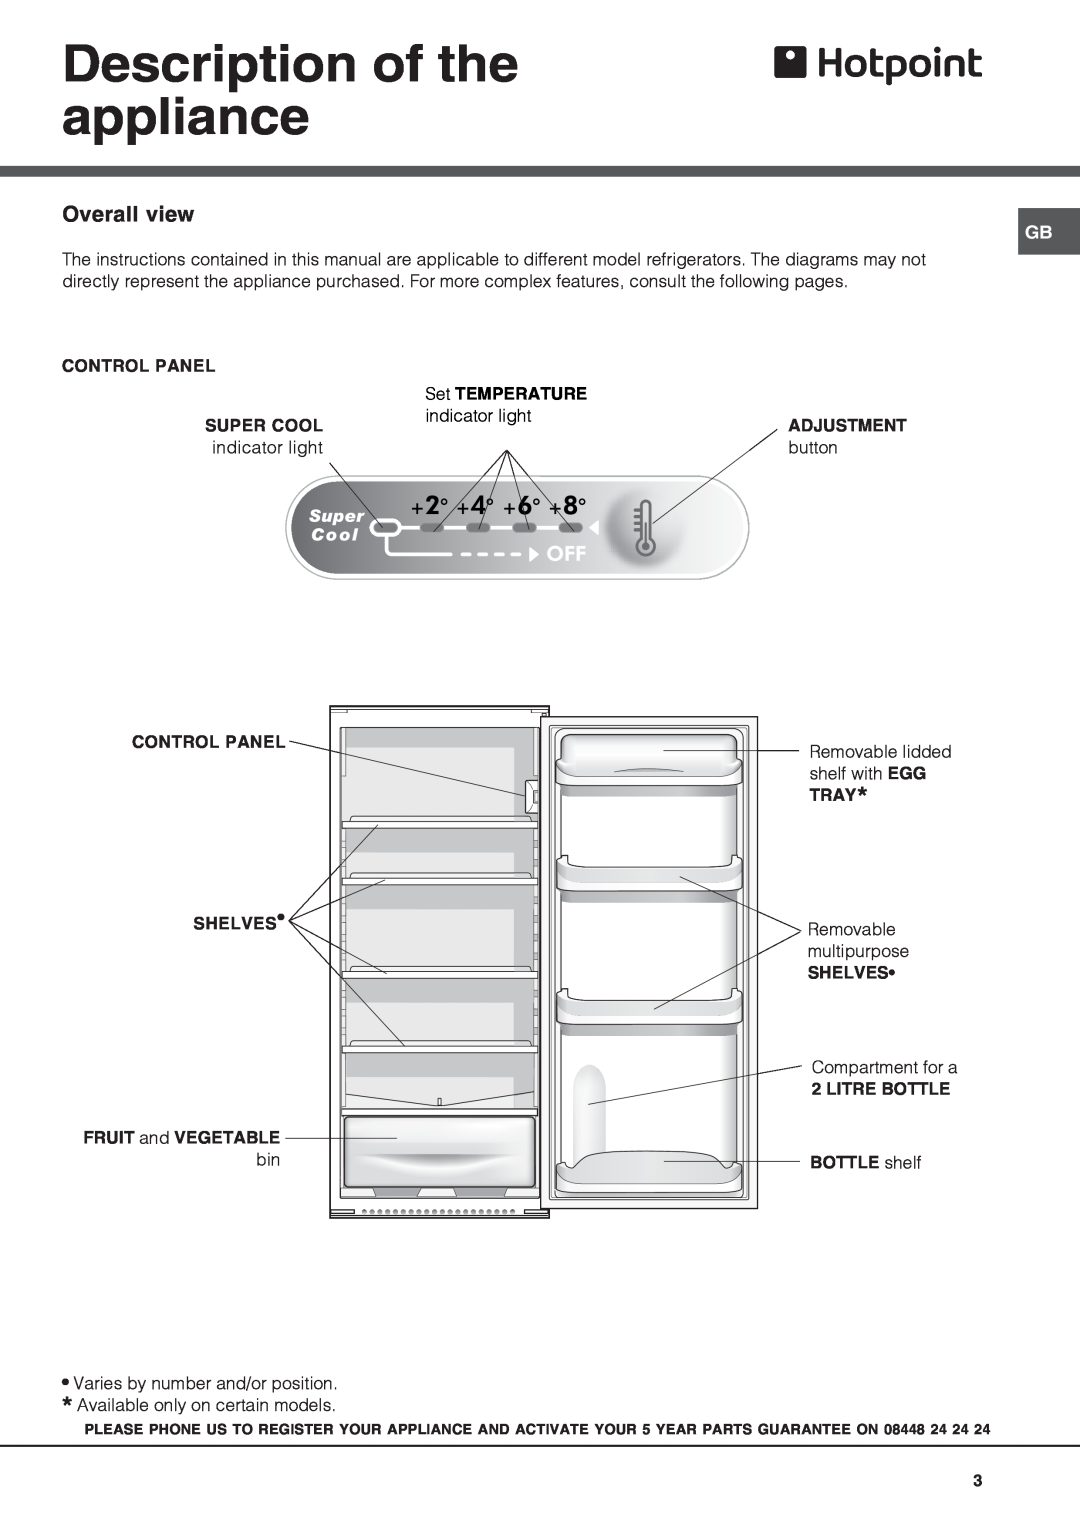 Hotpoint HS2322L manual Description of the appliance, Overall view 